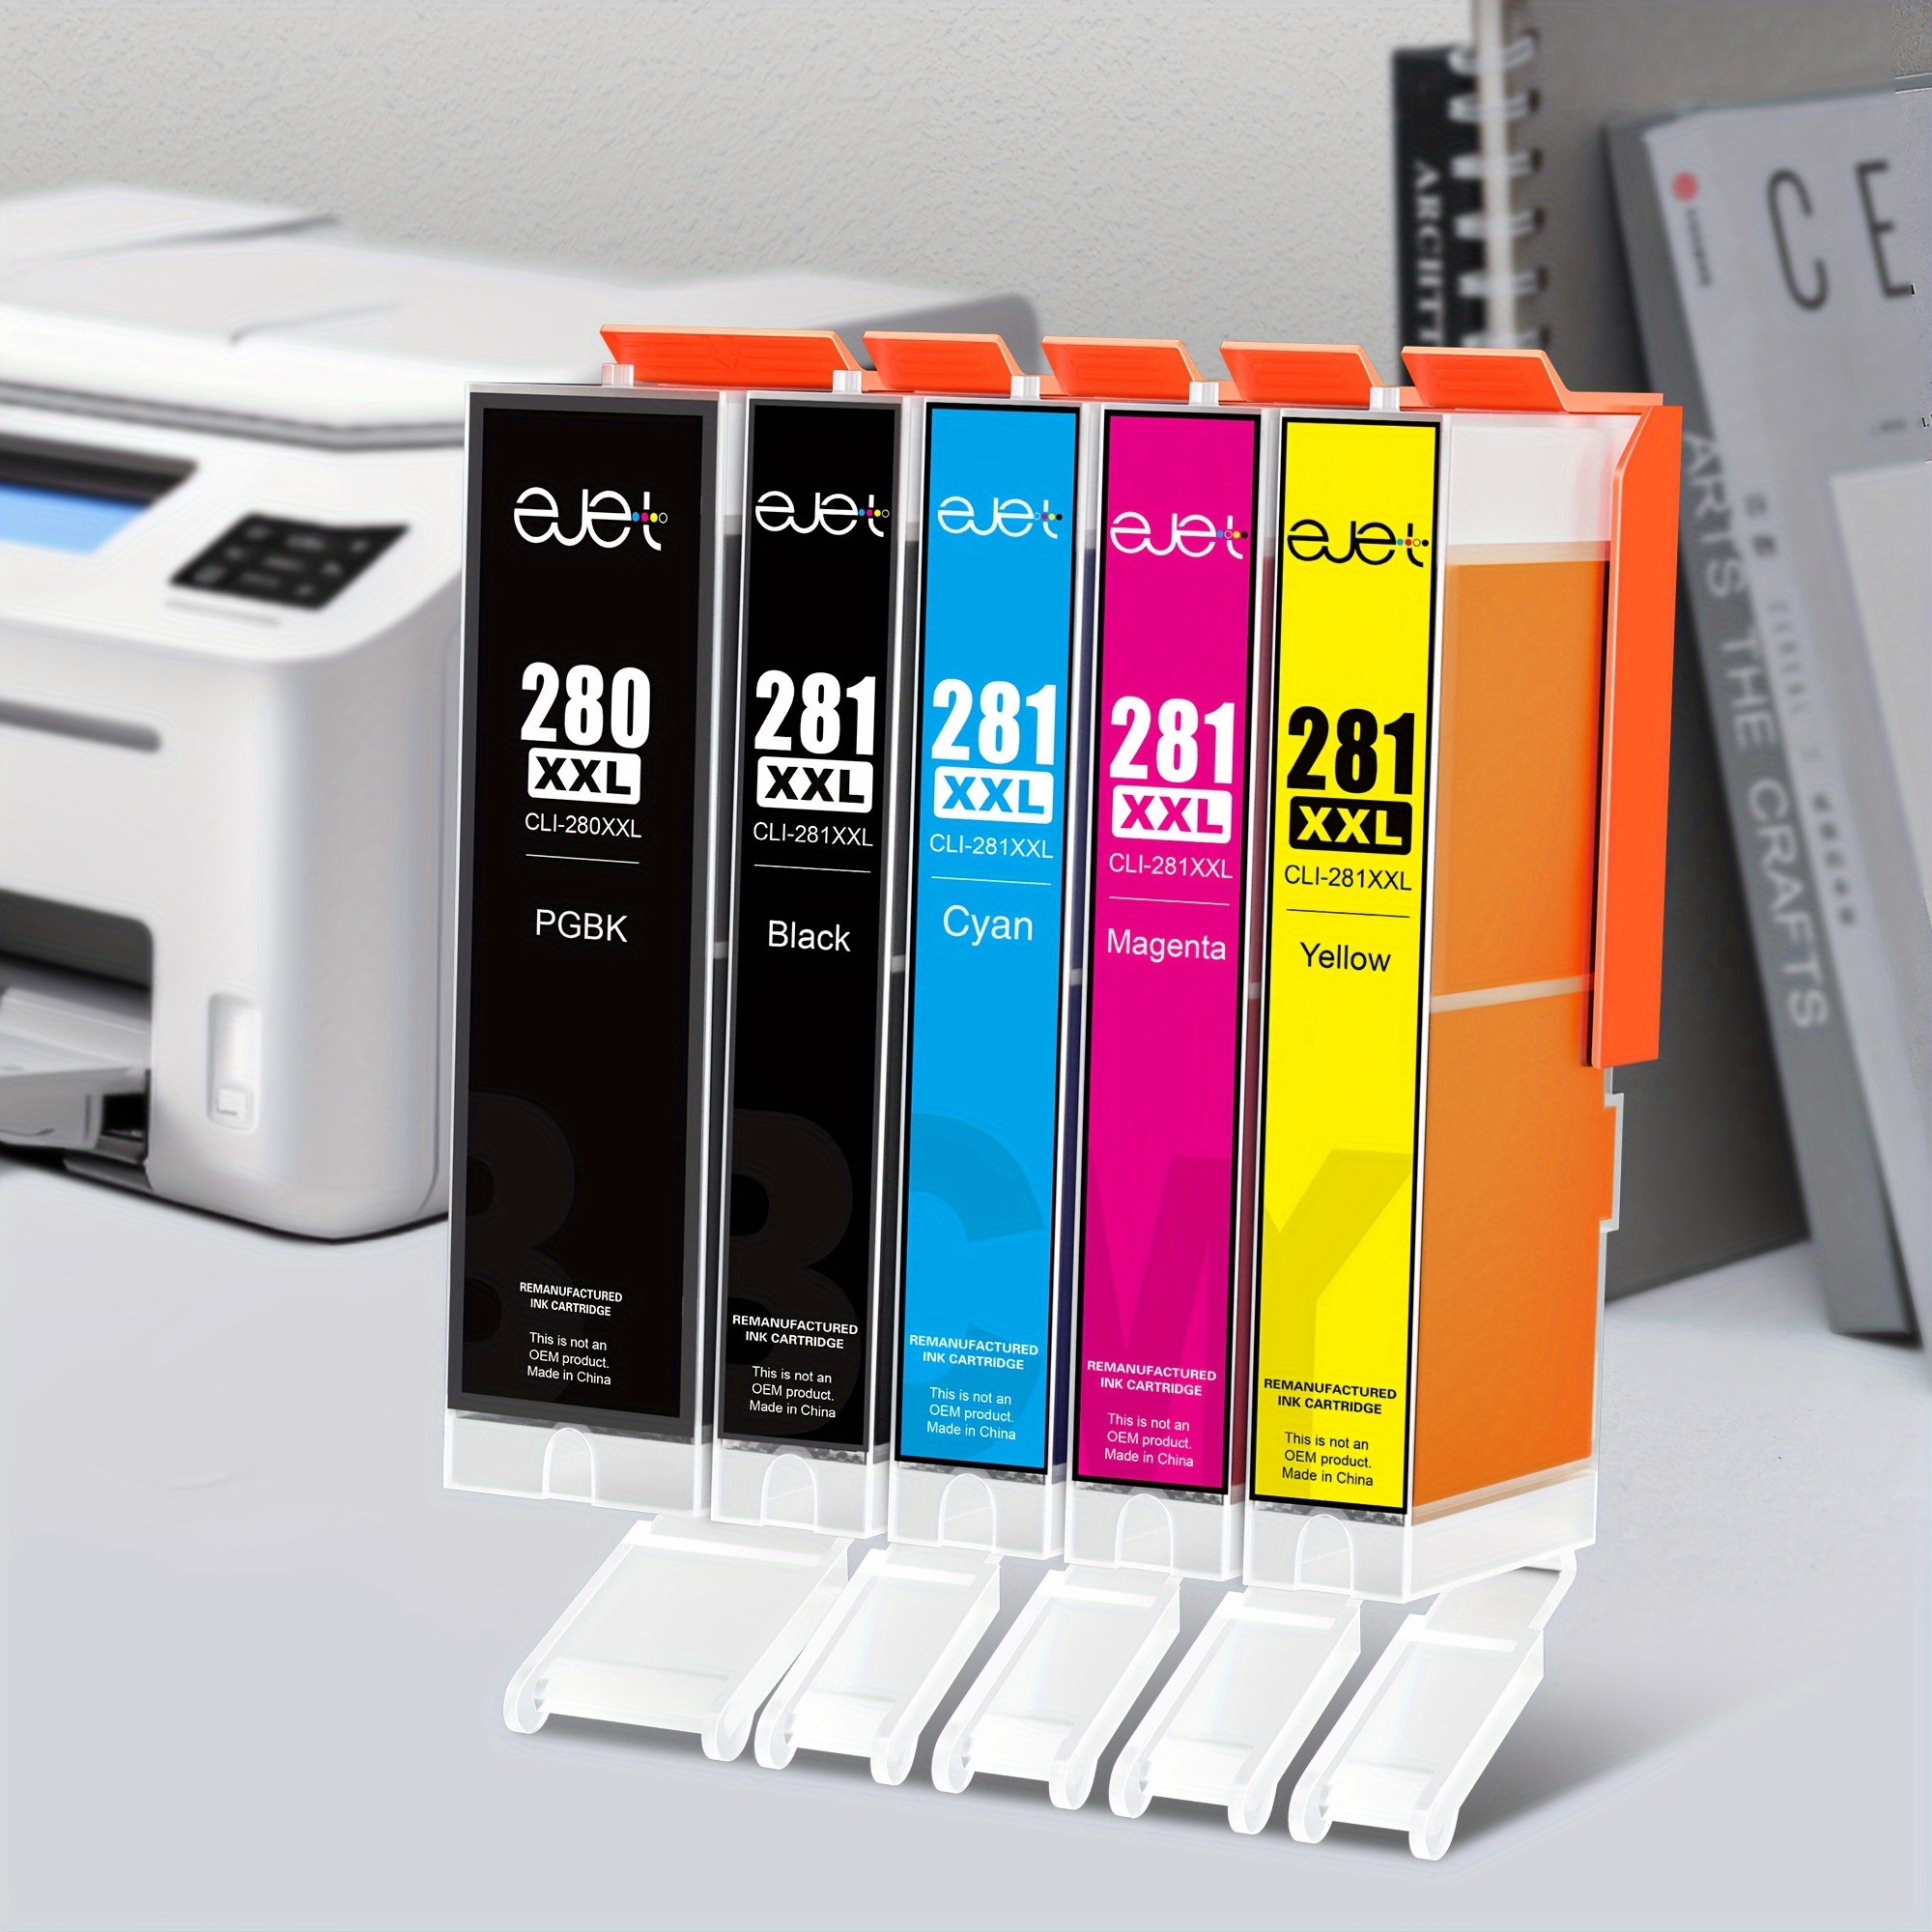 

5 Pack 280 Ink Cartridges Replacement For 280 281 Ink Cartridges Compatible With Tr8620a Tr8520 Tr7520 Ts9120 Ts6320 Ts6220 Ts6120 Ts702 Ts8120 Ts8220 Ts8320 Printer